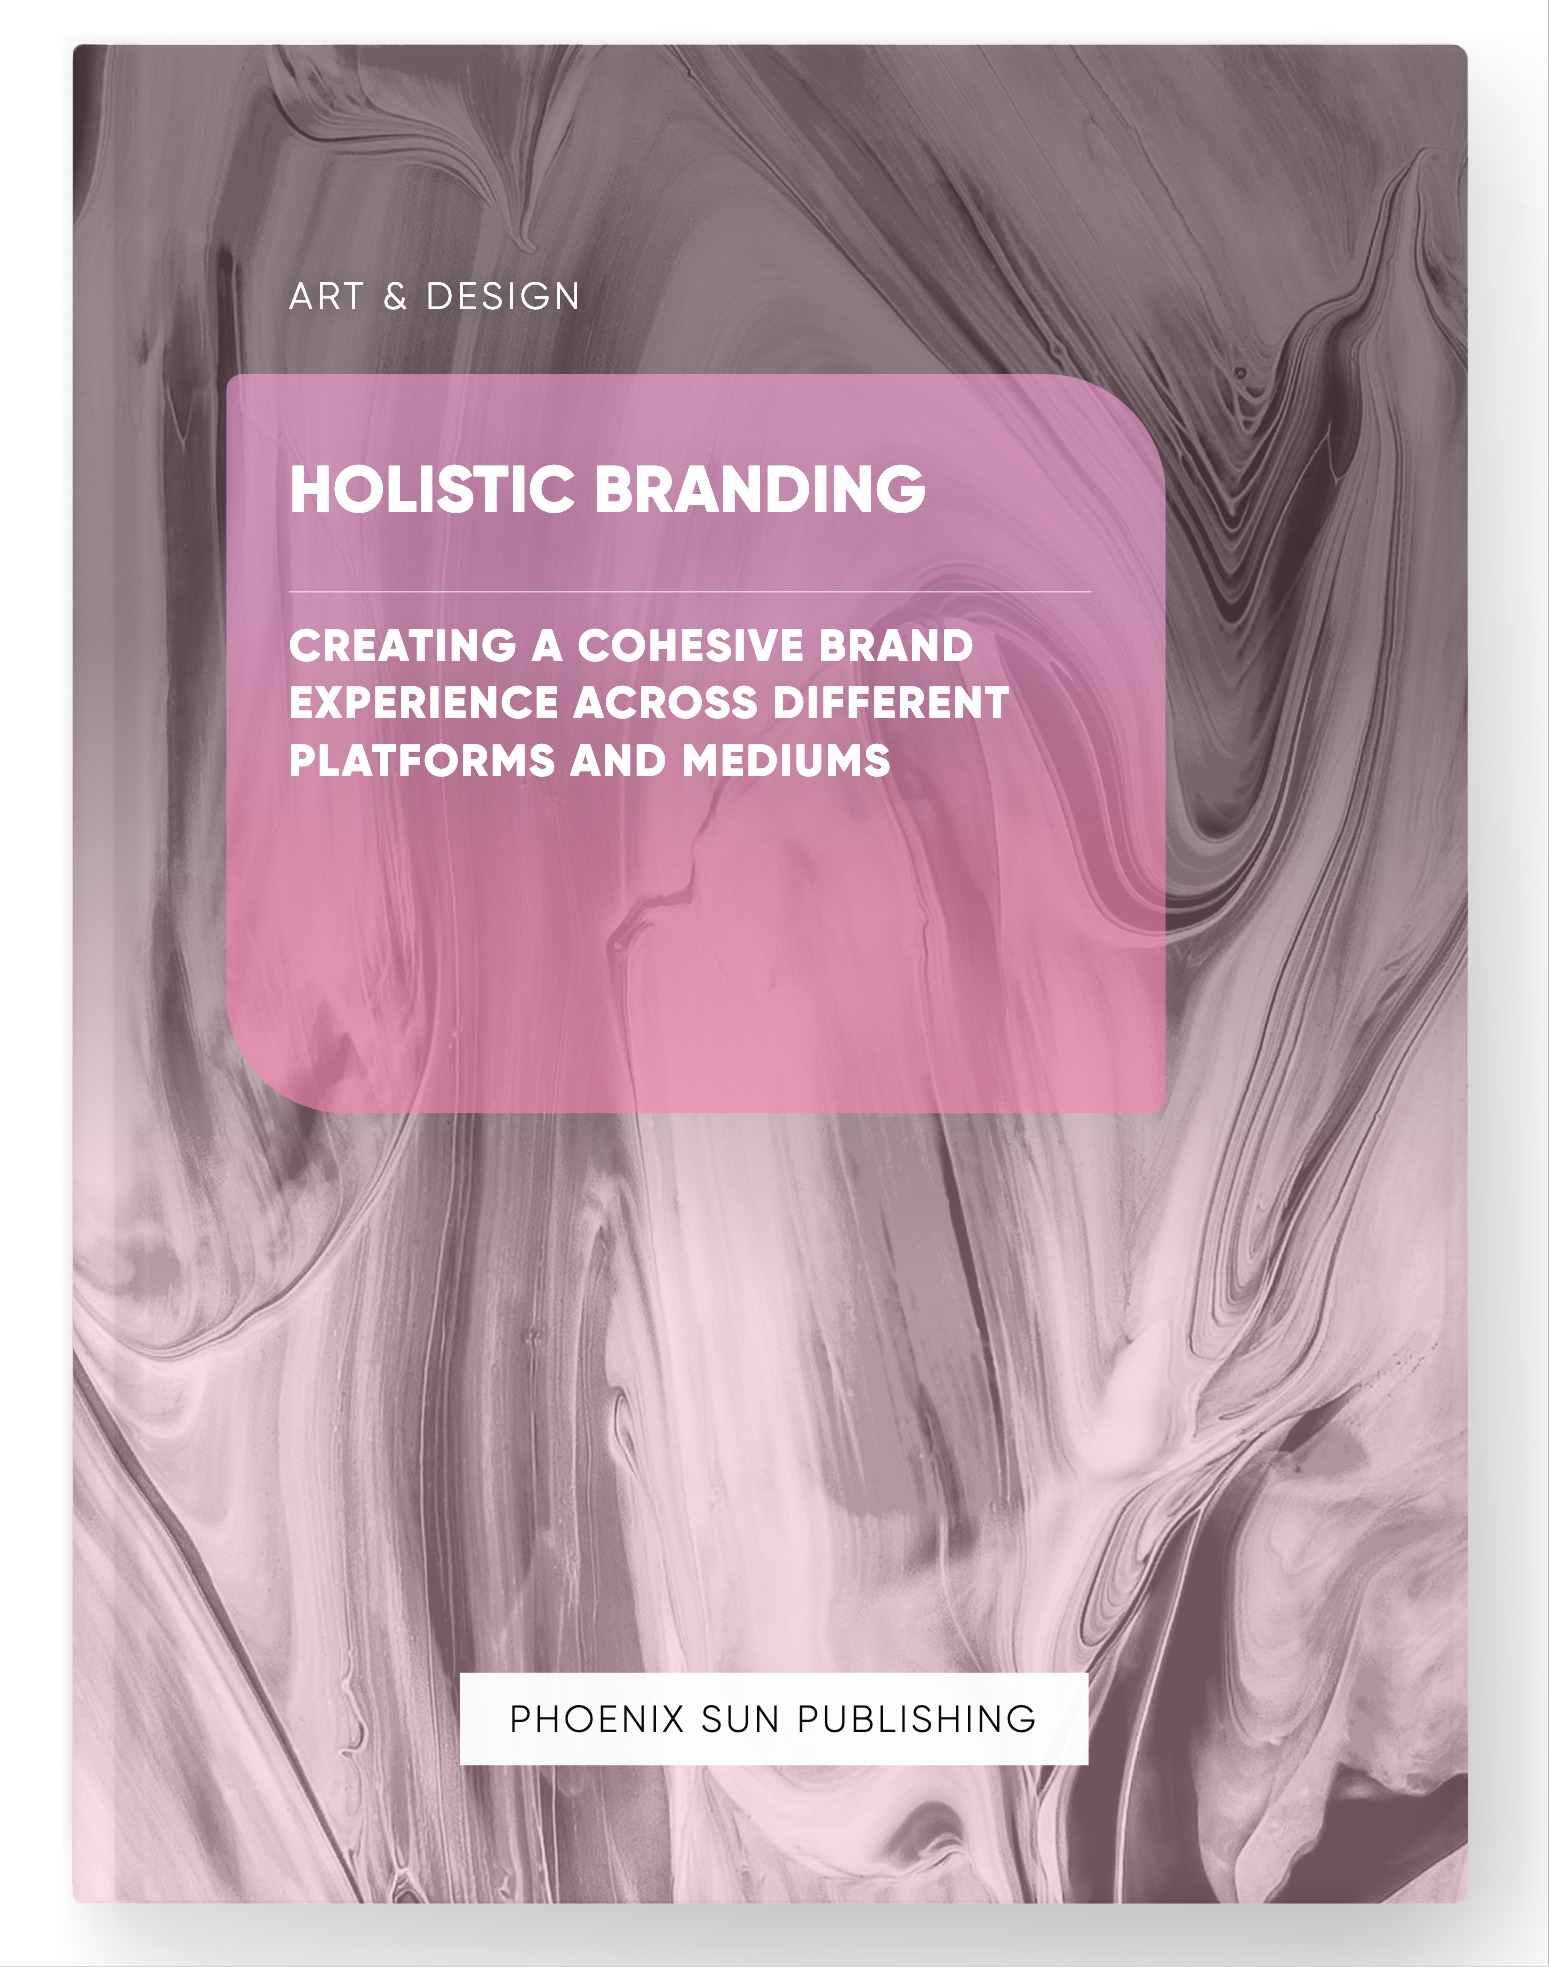 Holistic Branding – Creating a Cohesive Brand Experience Across Different Platforms and Mediums